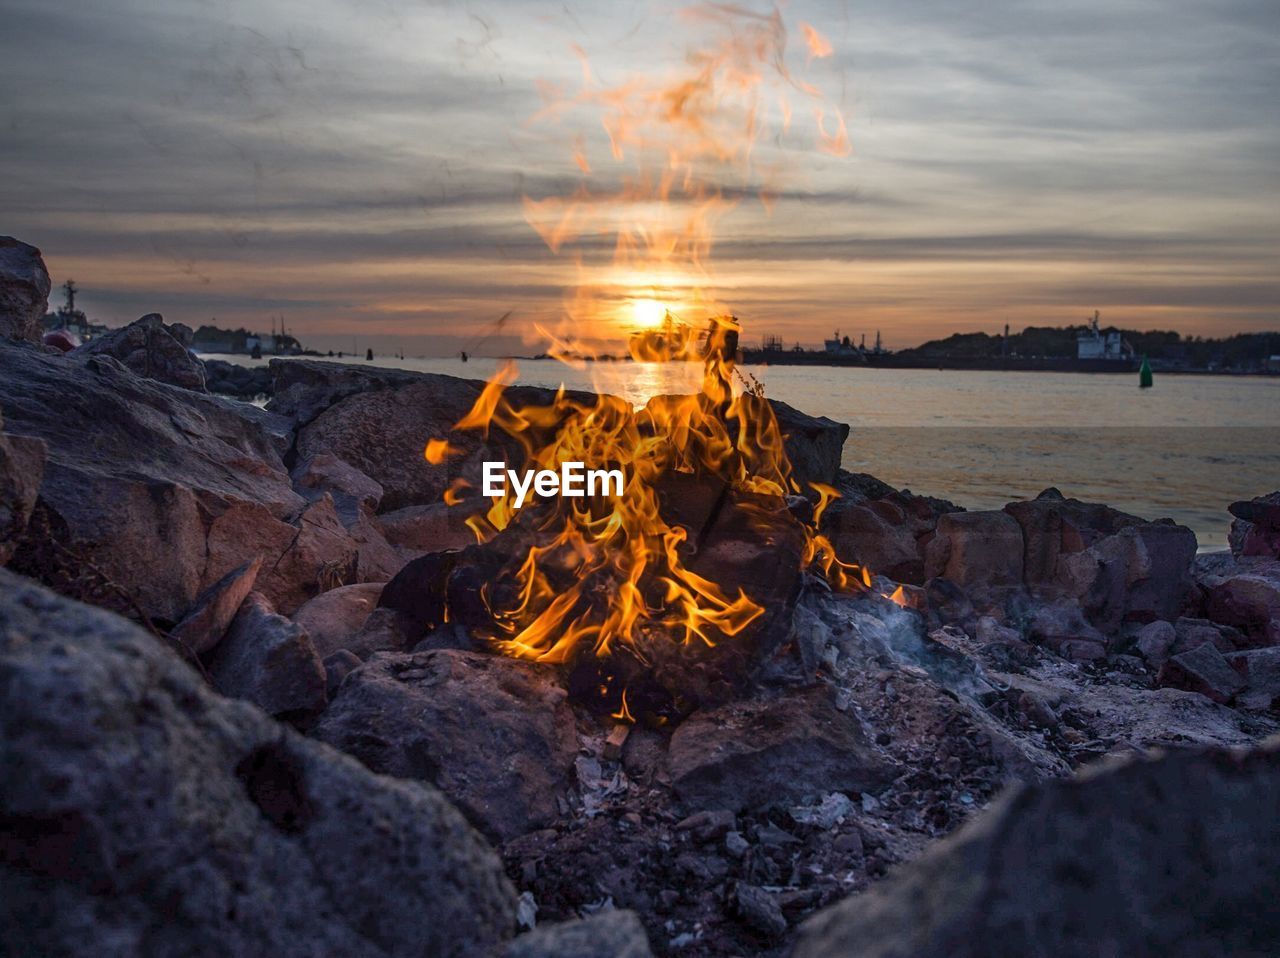 Close-up of campfire on rocks at lakeshore against cloudy sky during sunset